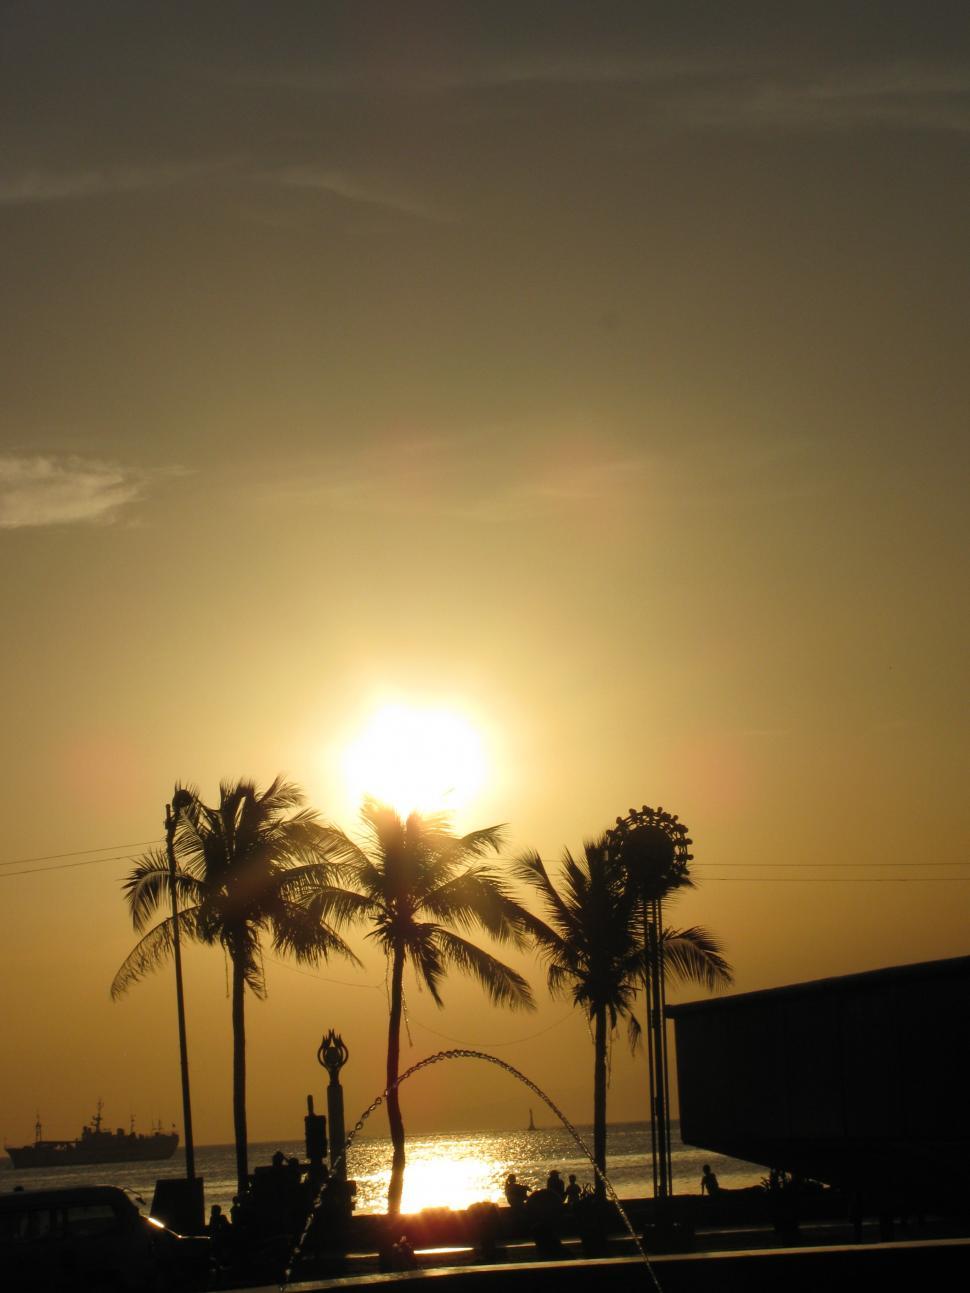 Free Image of Sun Setting Over Ocean With Palm Trees 